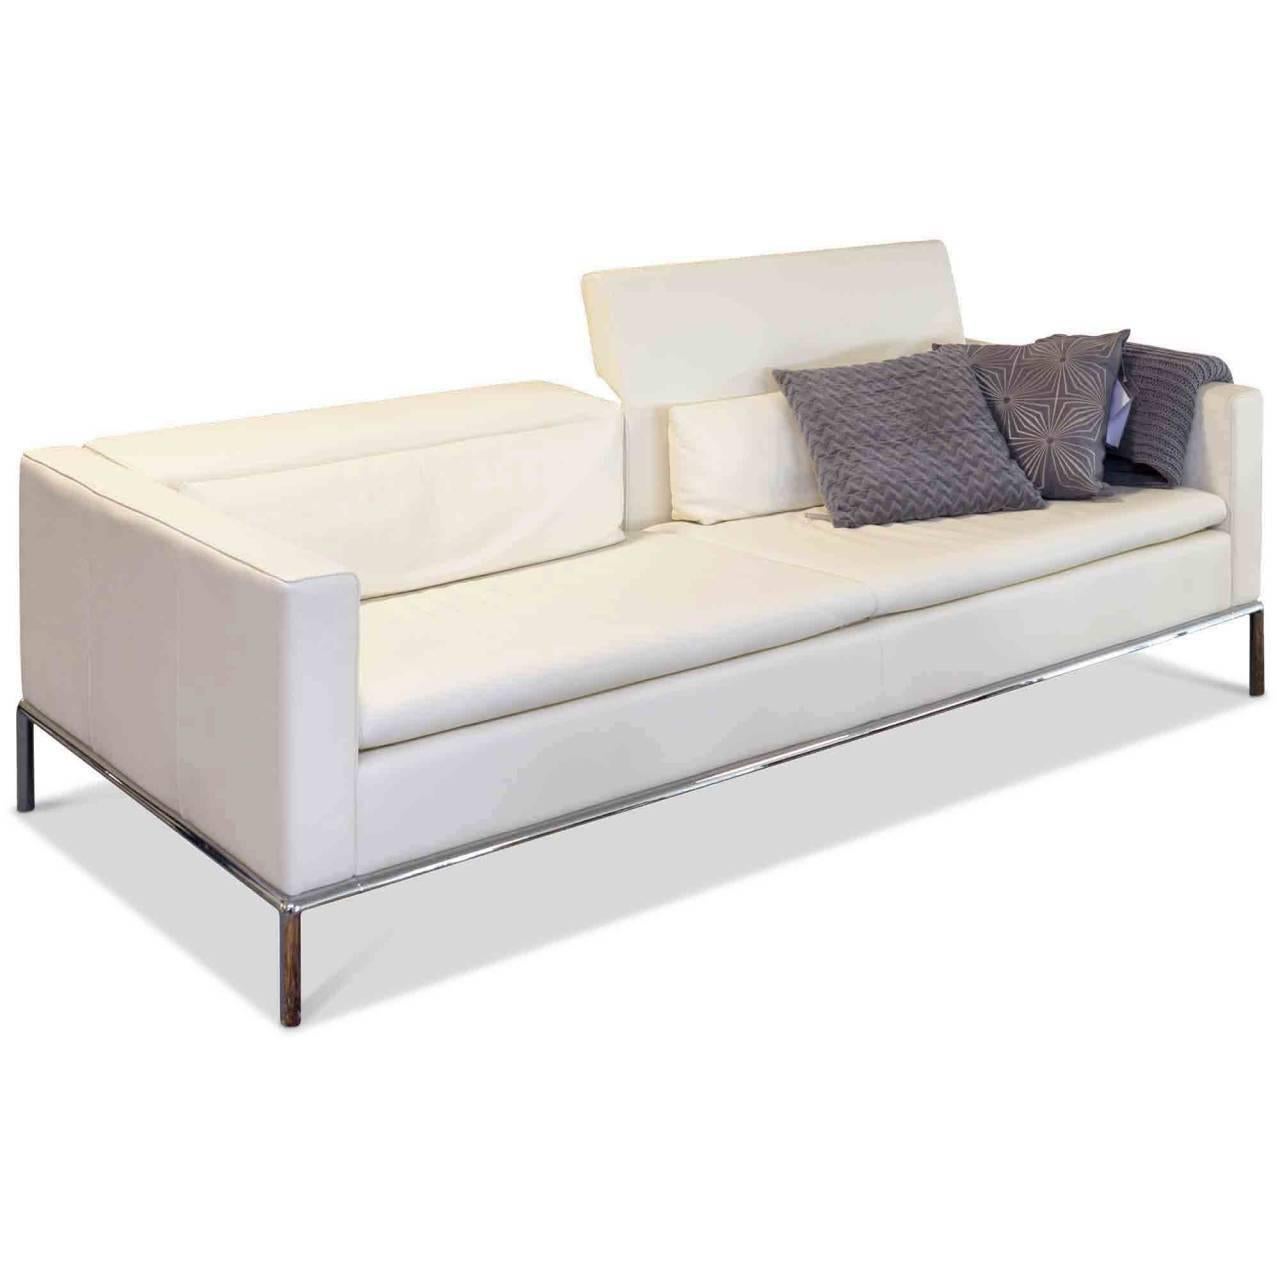 We are delighted to present to you the harmonious sofa 